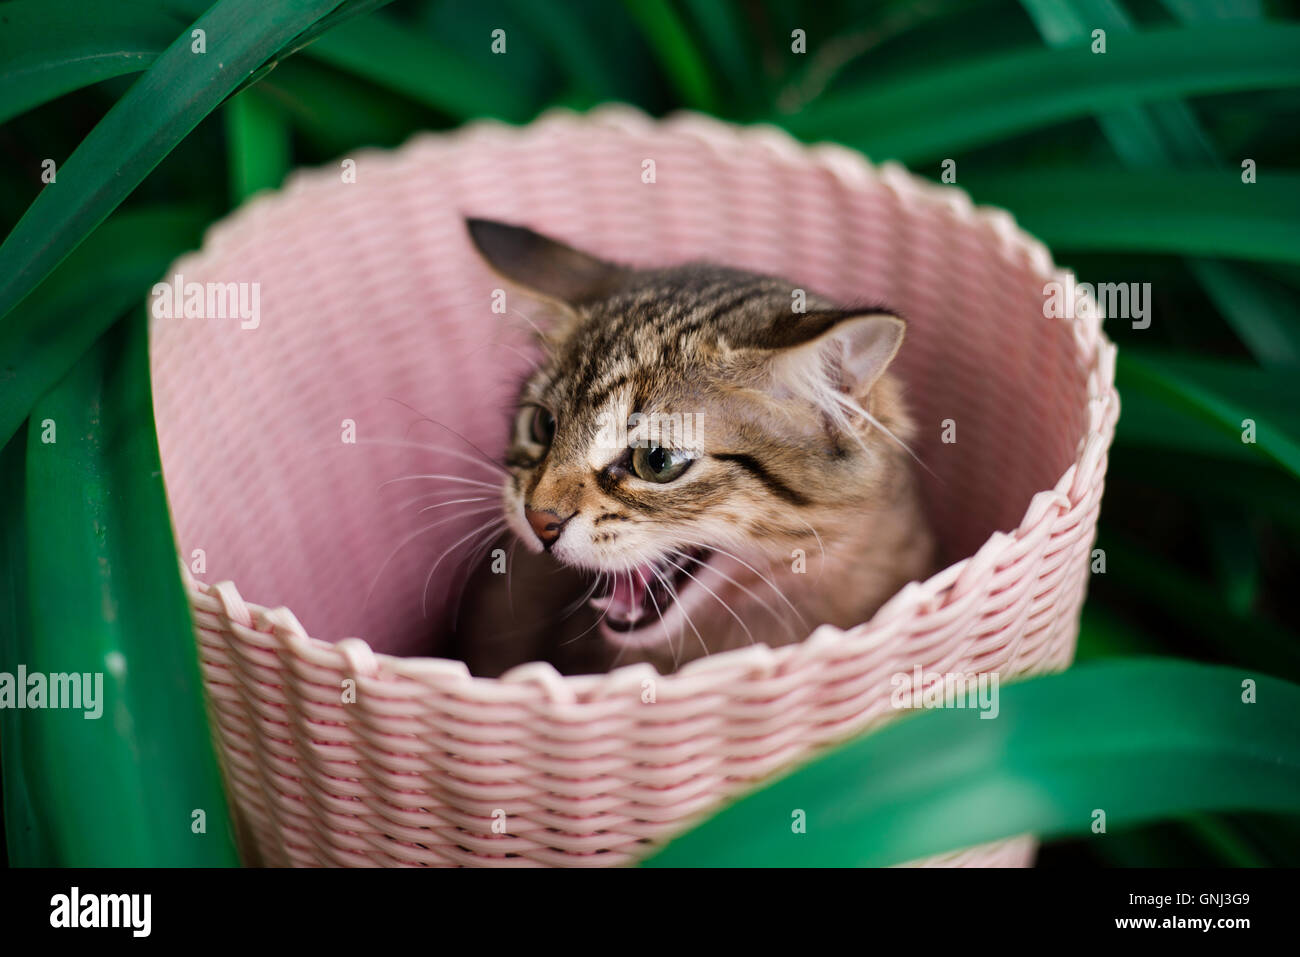 Cat sitting in basket hissing Stock Photo